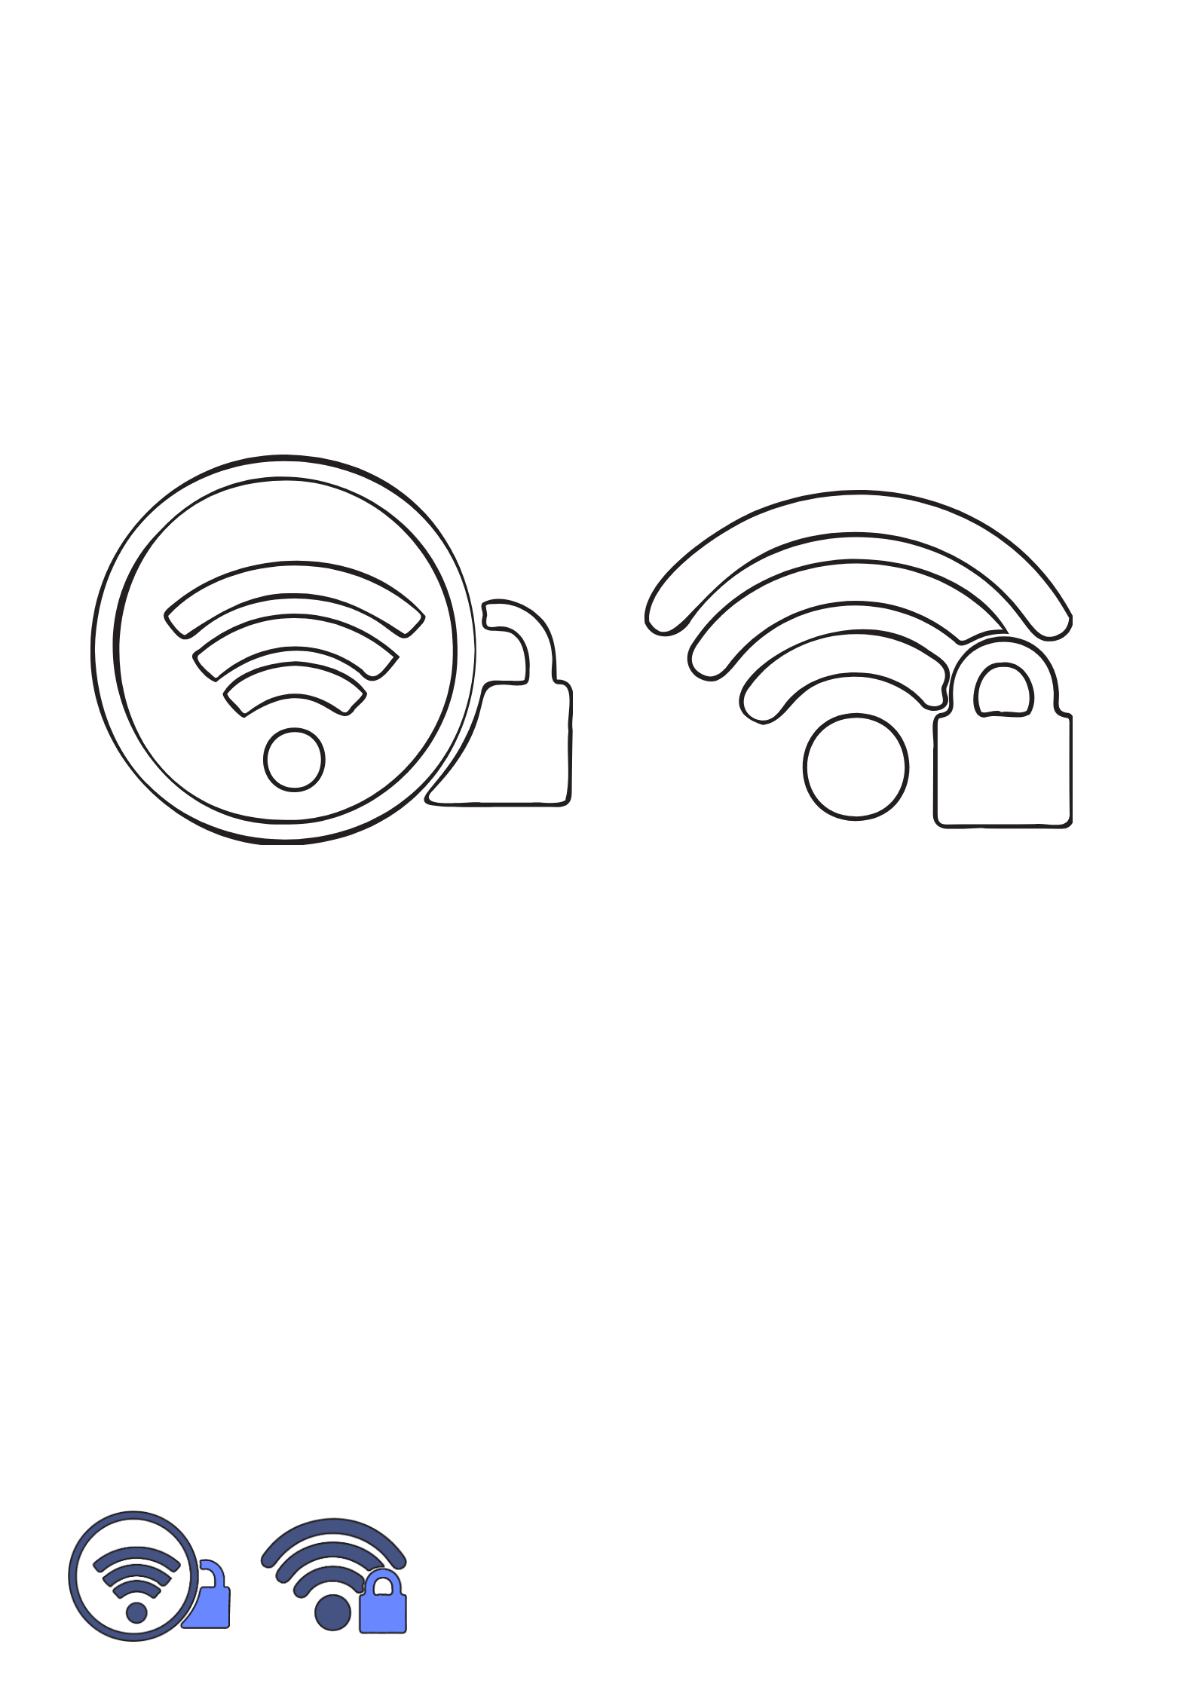 Secure Wifi coloring page